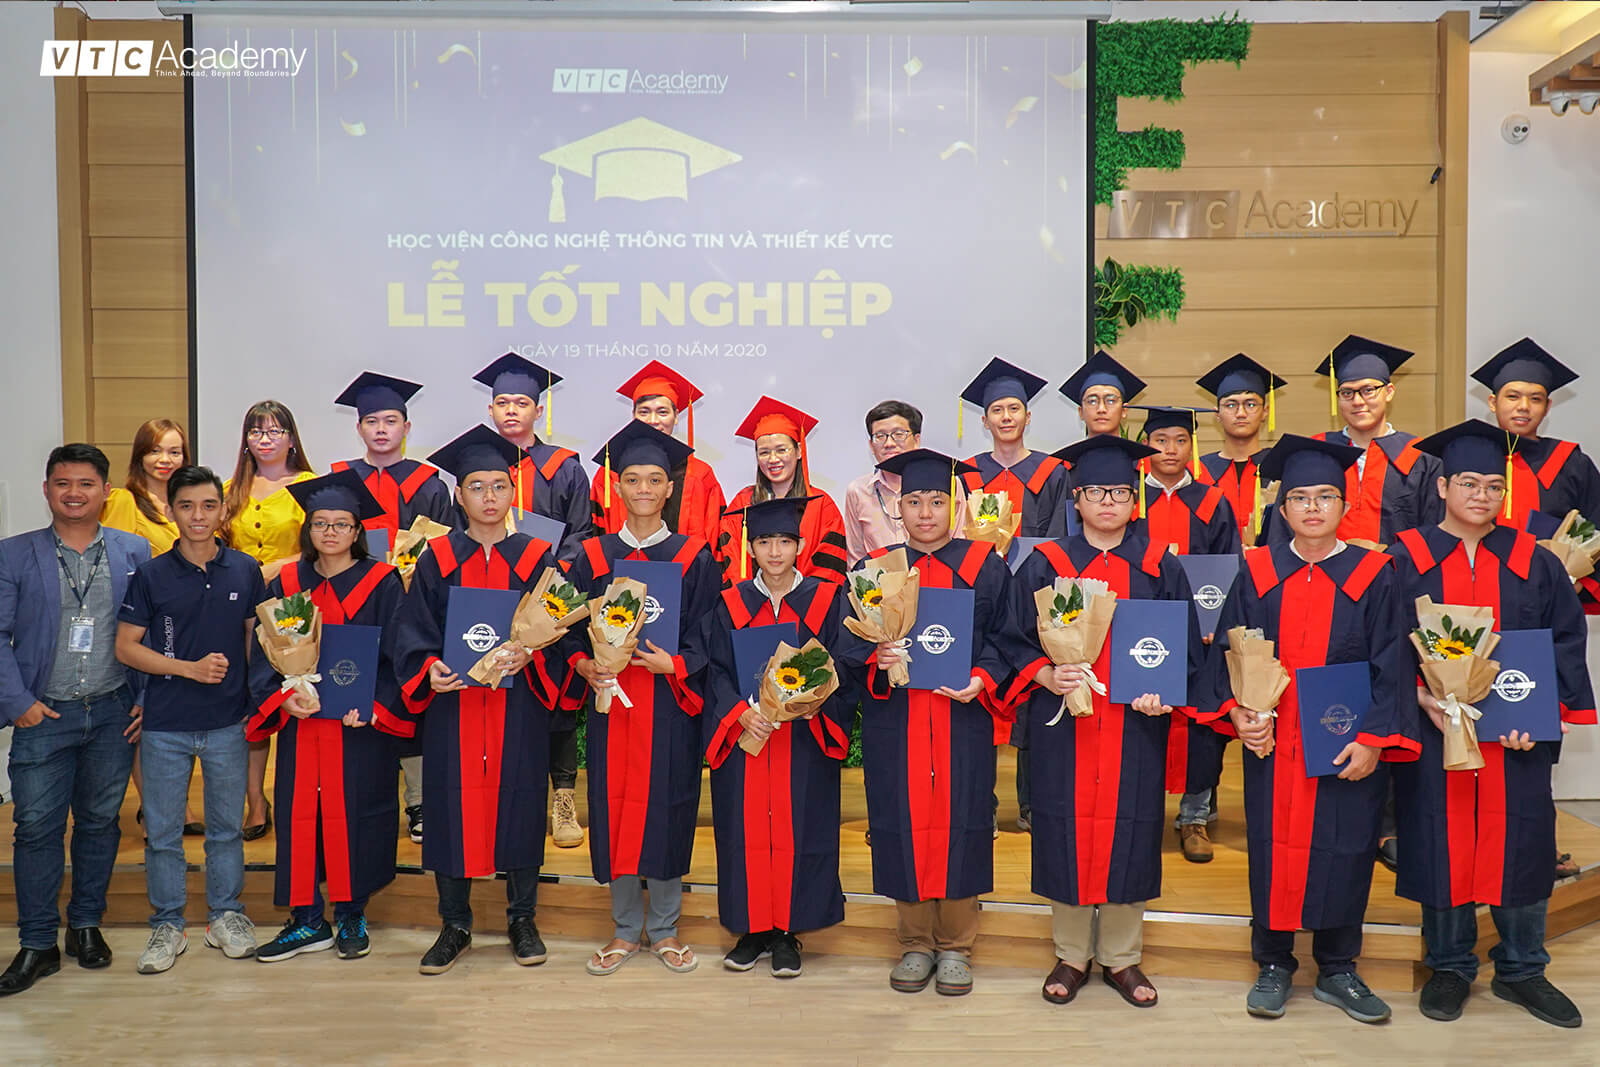 VTC Academy organizes Graduation Ceremony for students in Ho Chi Minh City